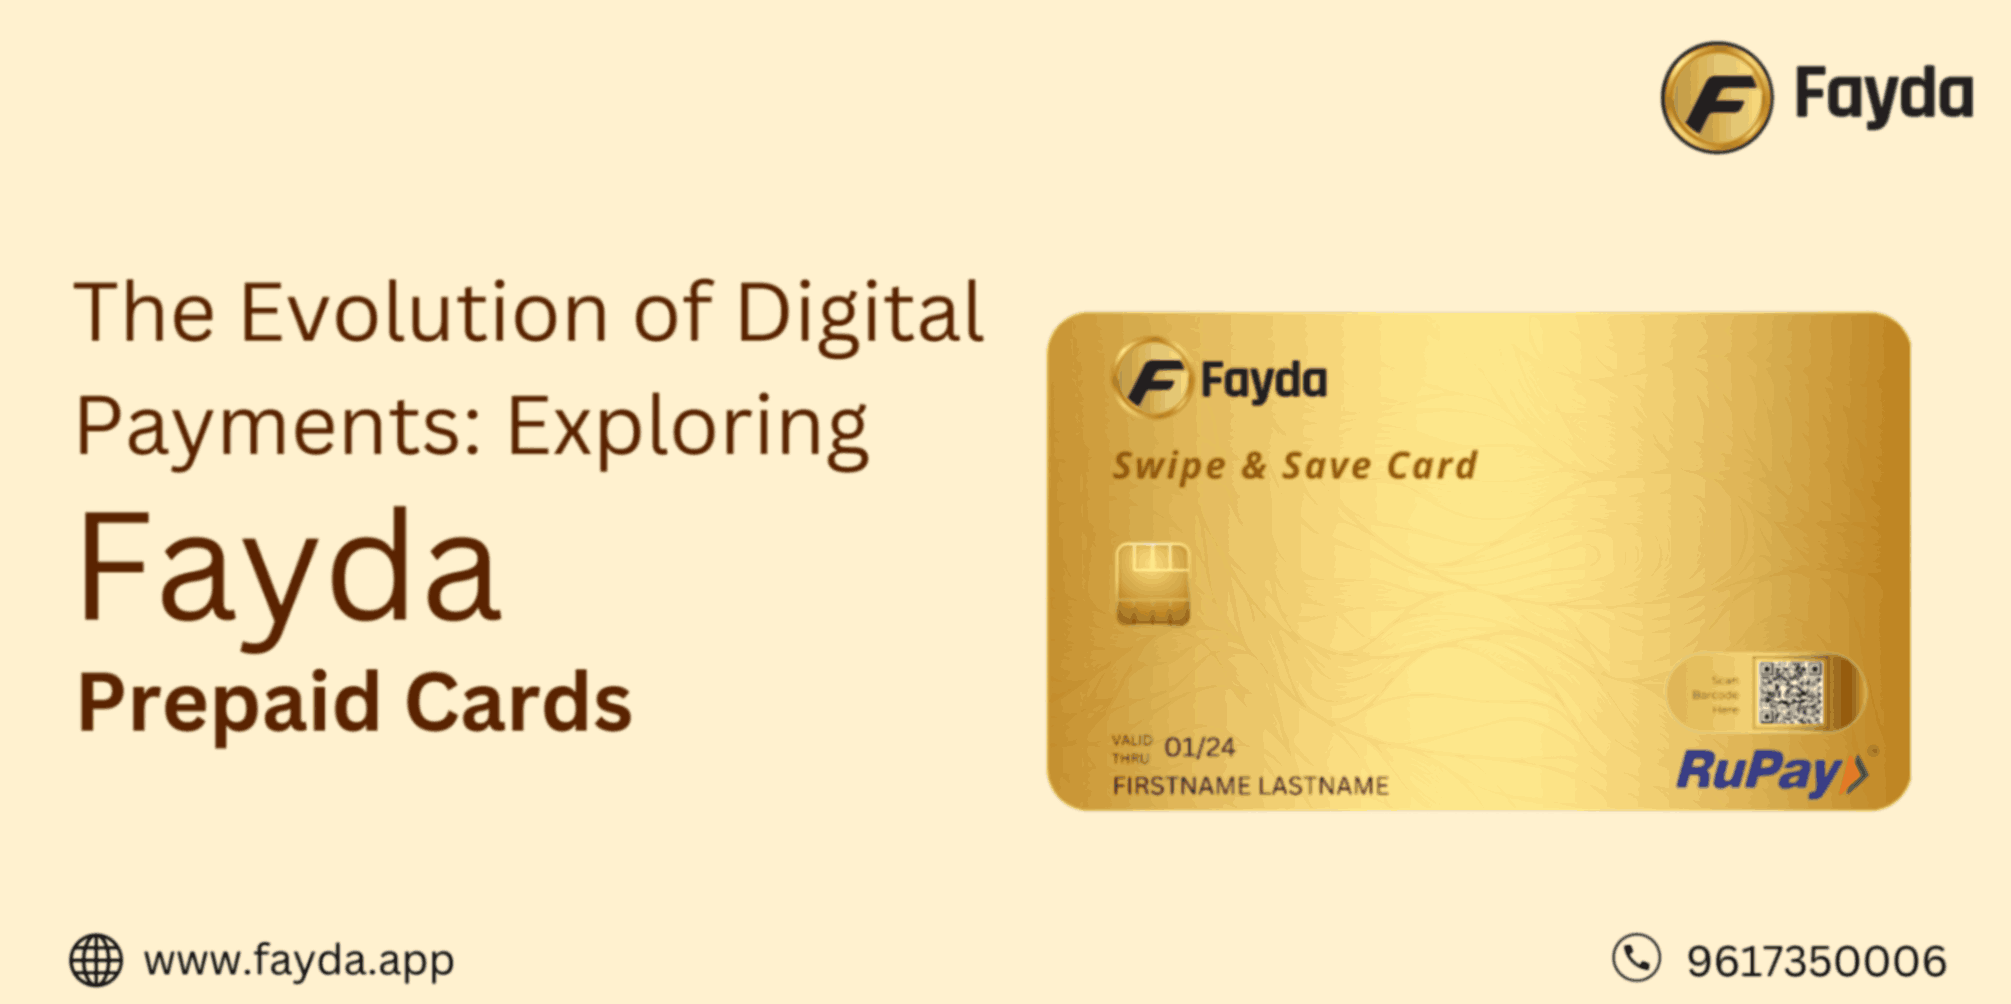 The Evolution of Digital Payments: Exploring Fayda Prepaid Cards